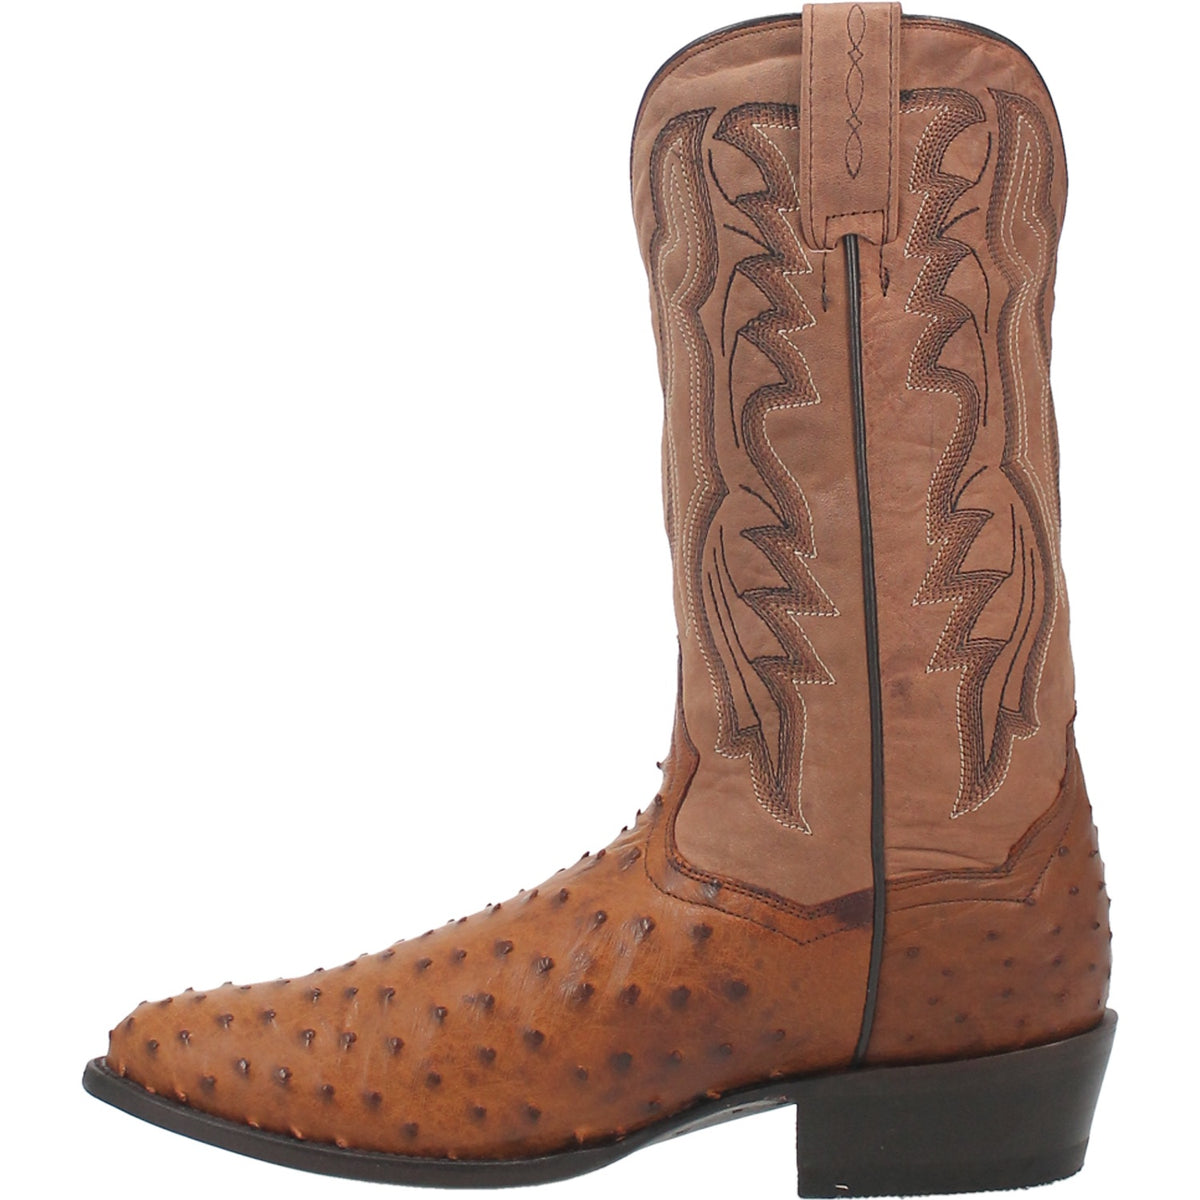 TEMPE FULL QUILL OSTRICH BOOT Image